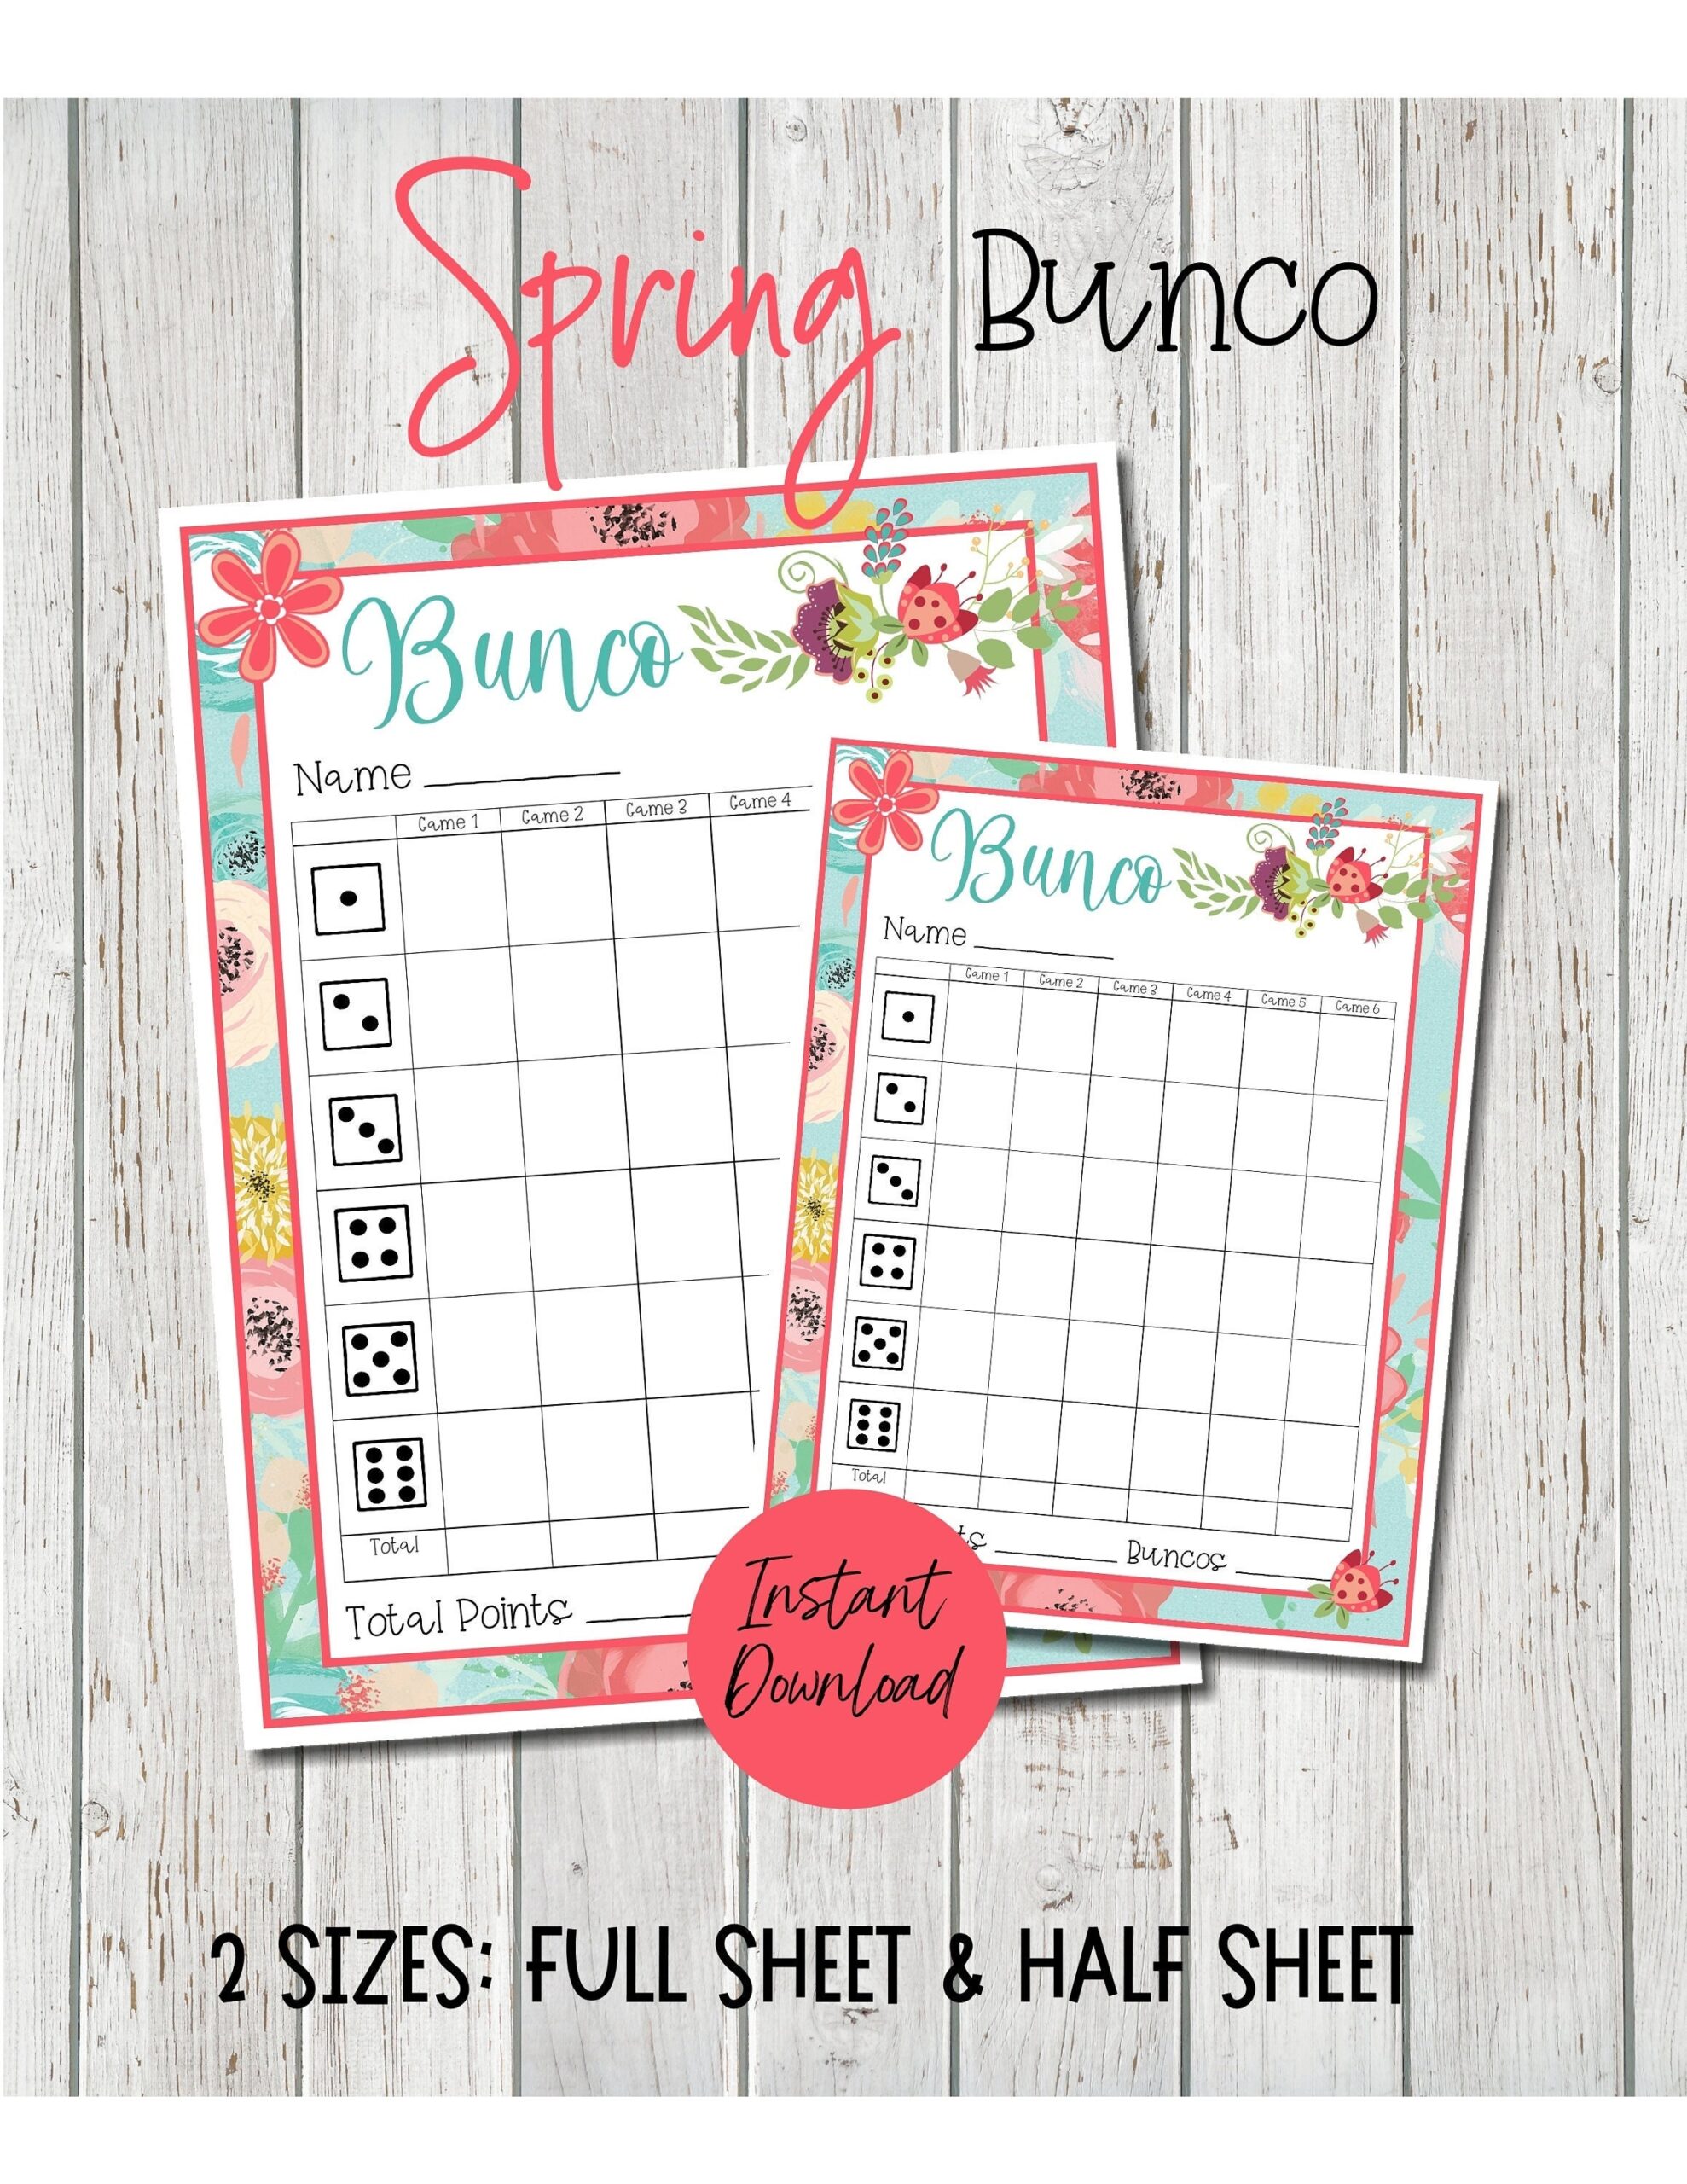 Spring Bunco Score Sheets Bunco Worksheets For Spring Spring Bunco Score Cards Bunco Printables Printable Bunco Sheets Game Night Etsy